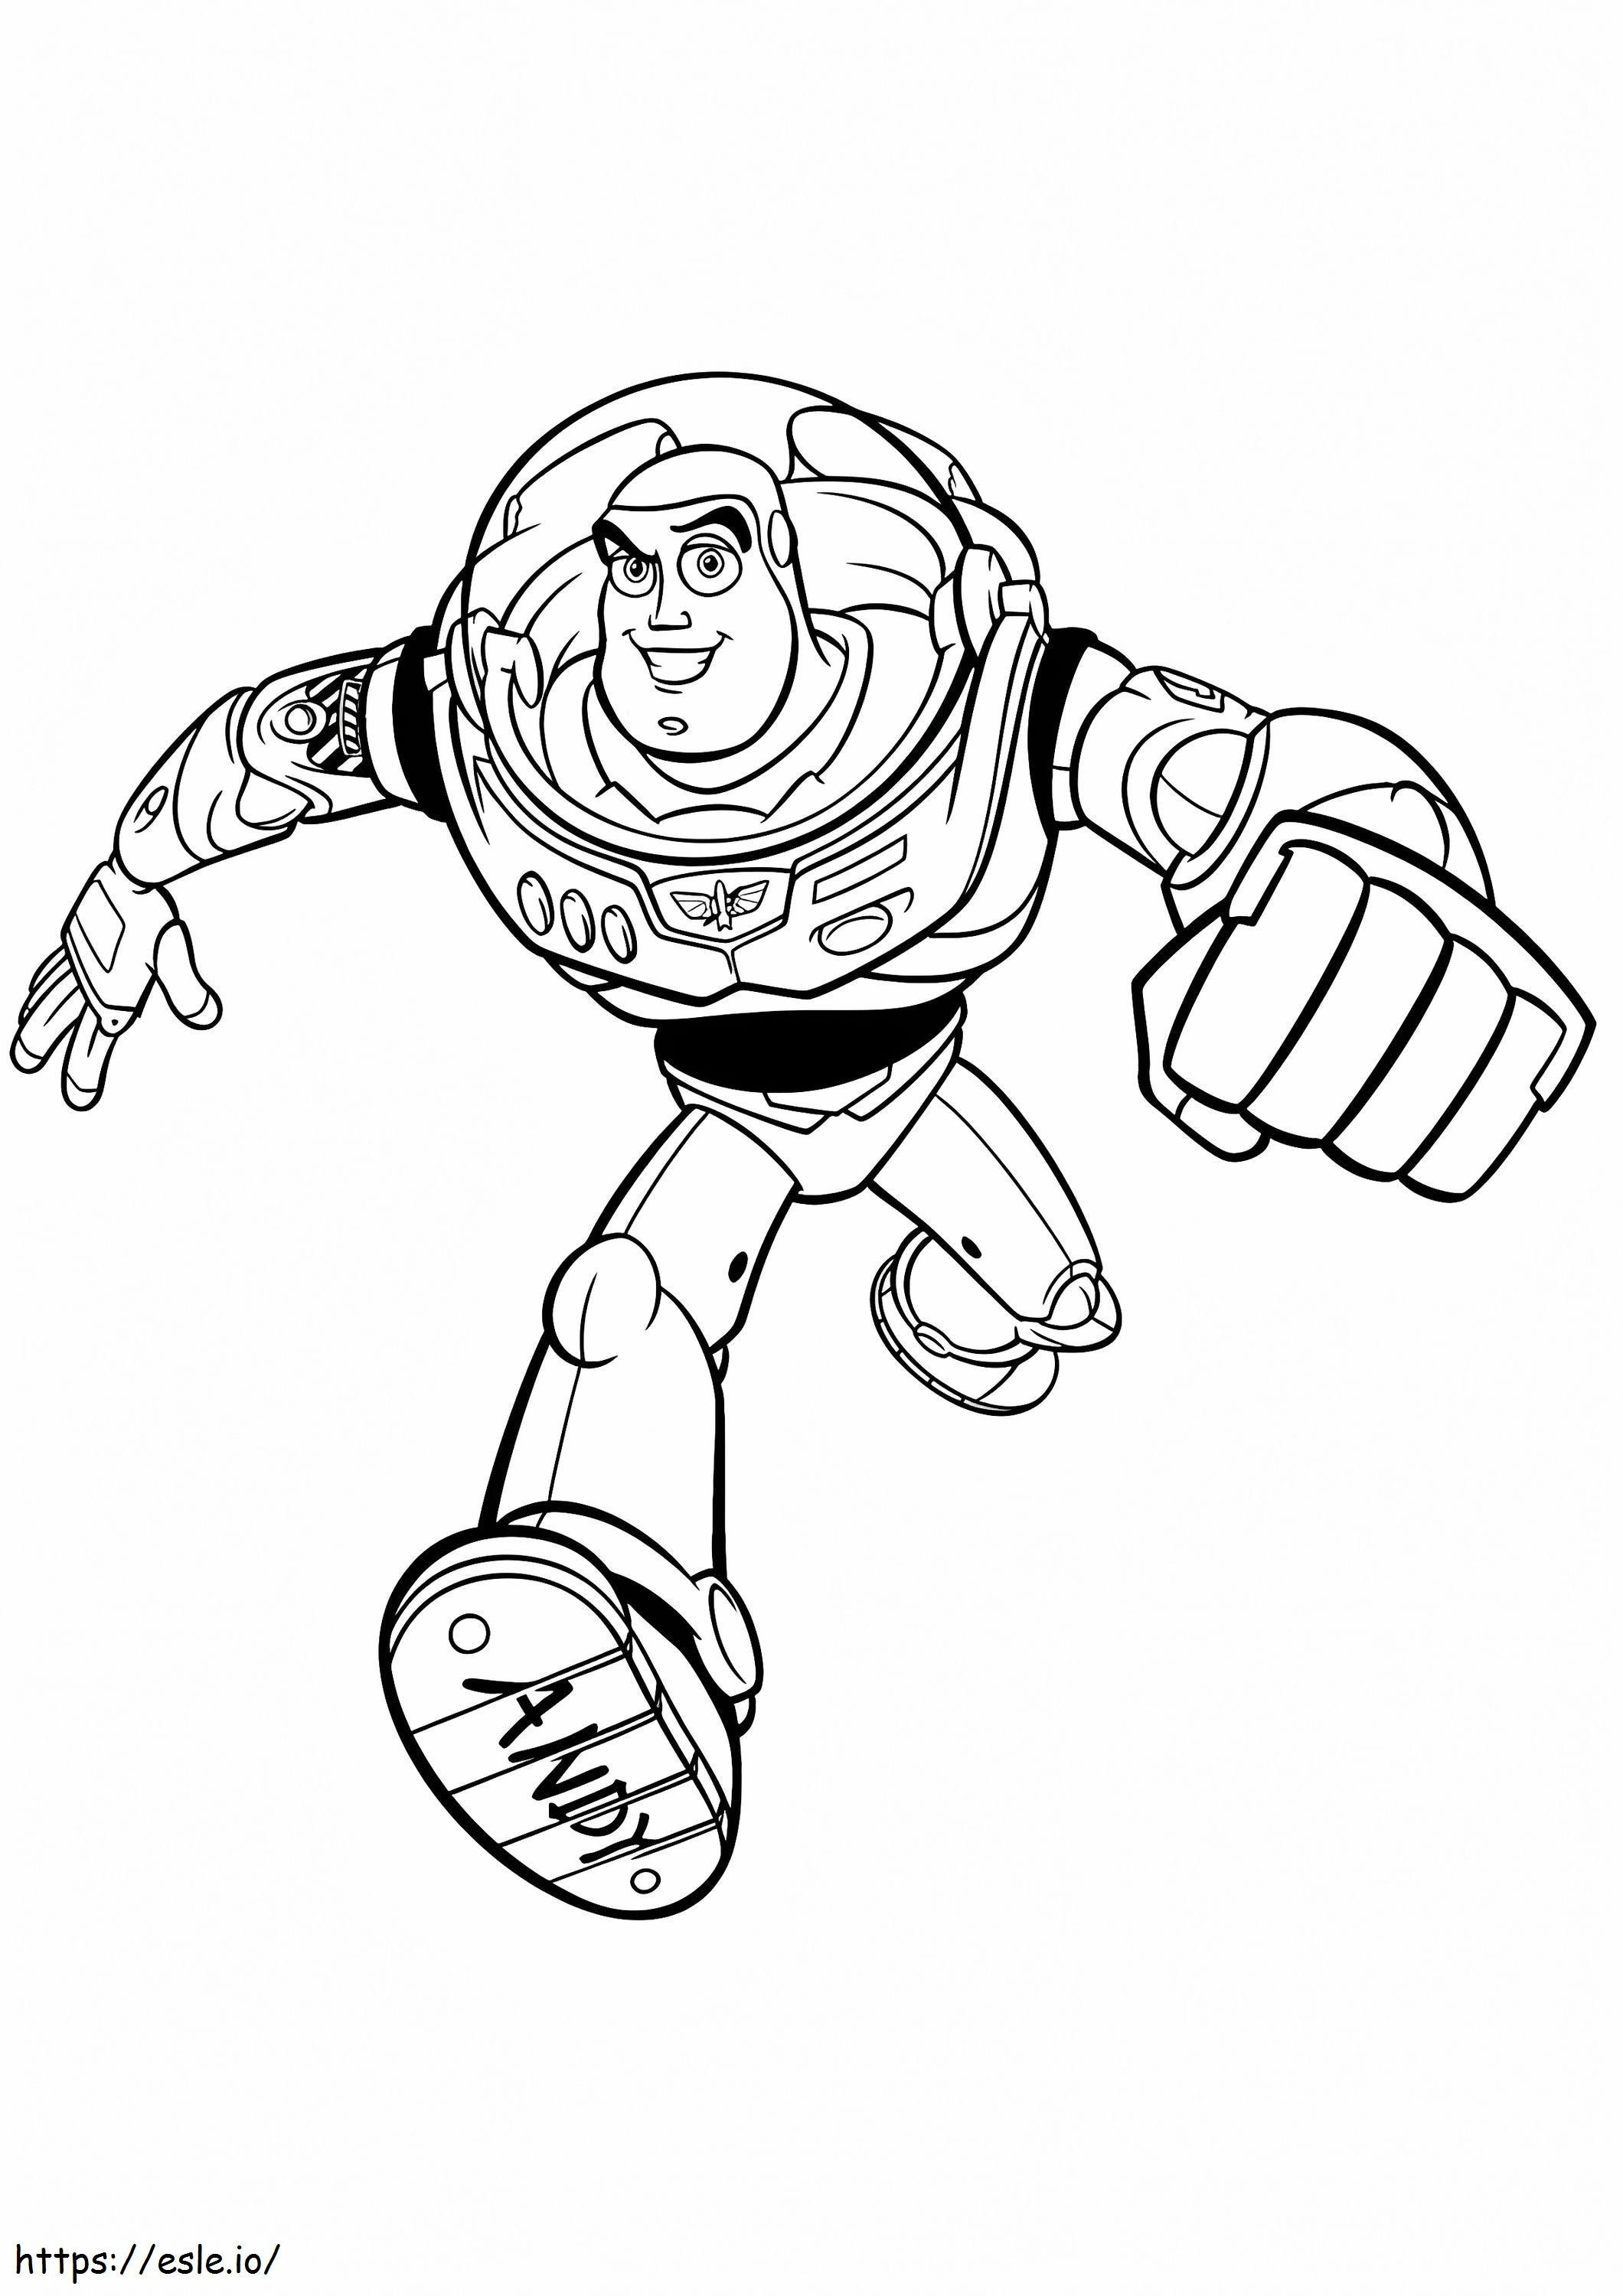 The Buzz Flying High A4 coloring page